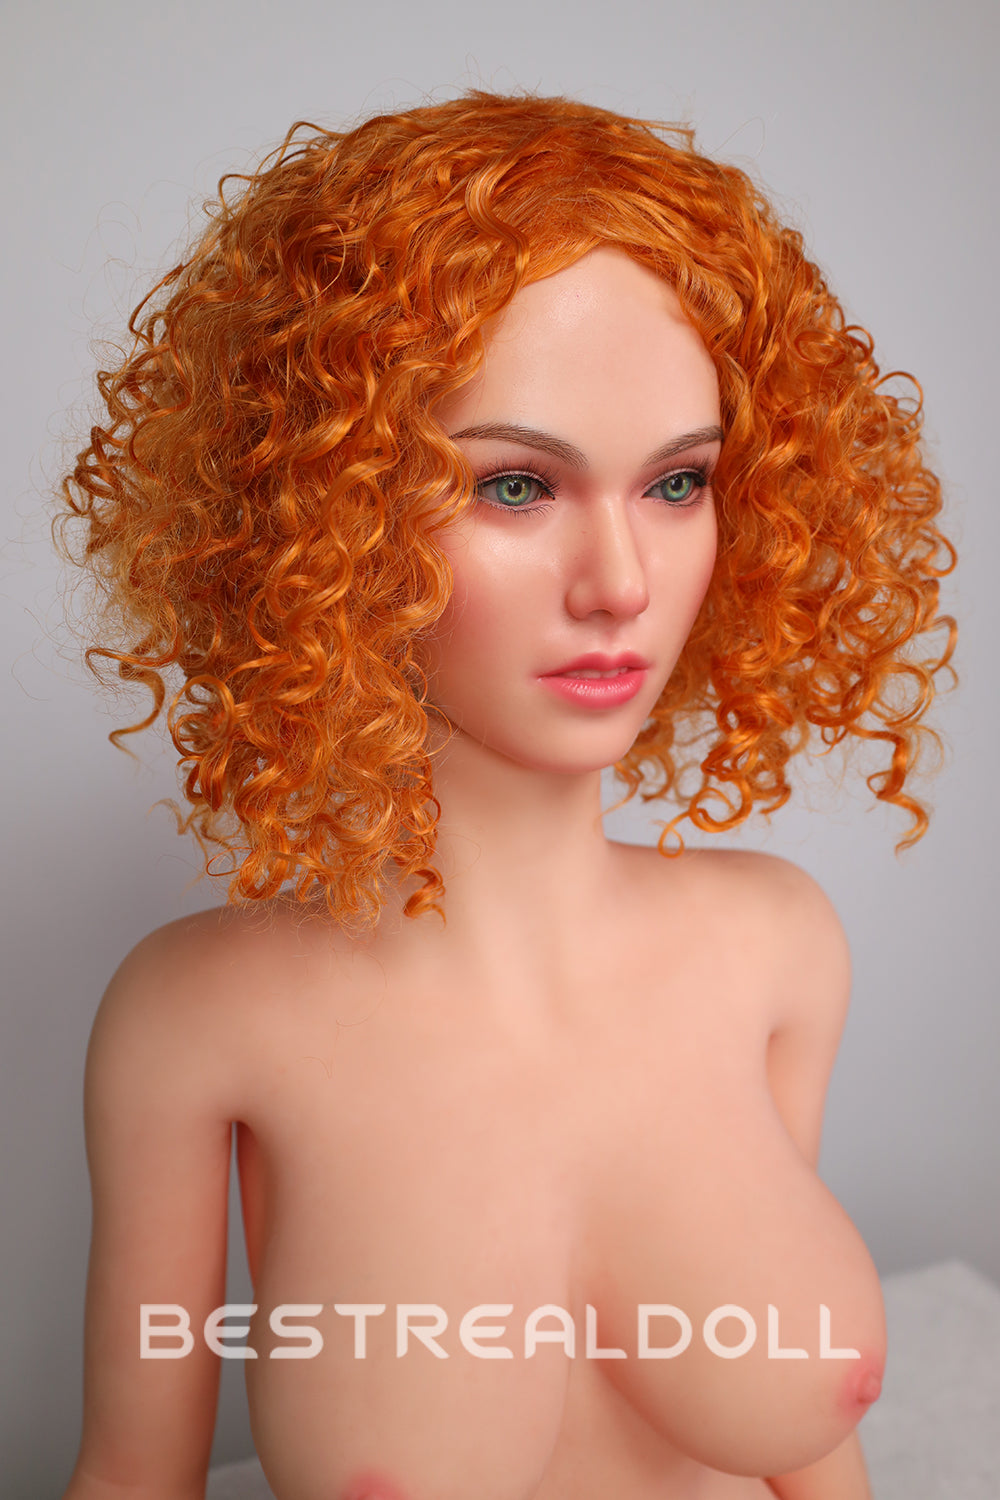 US Stock - RIDMII Jordi Unique Design Silicone Head European Style Sex Doll TPE Body Jelly Breasts Adult Love Doll with Wig